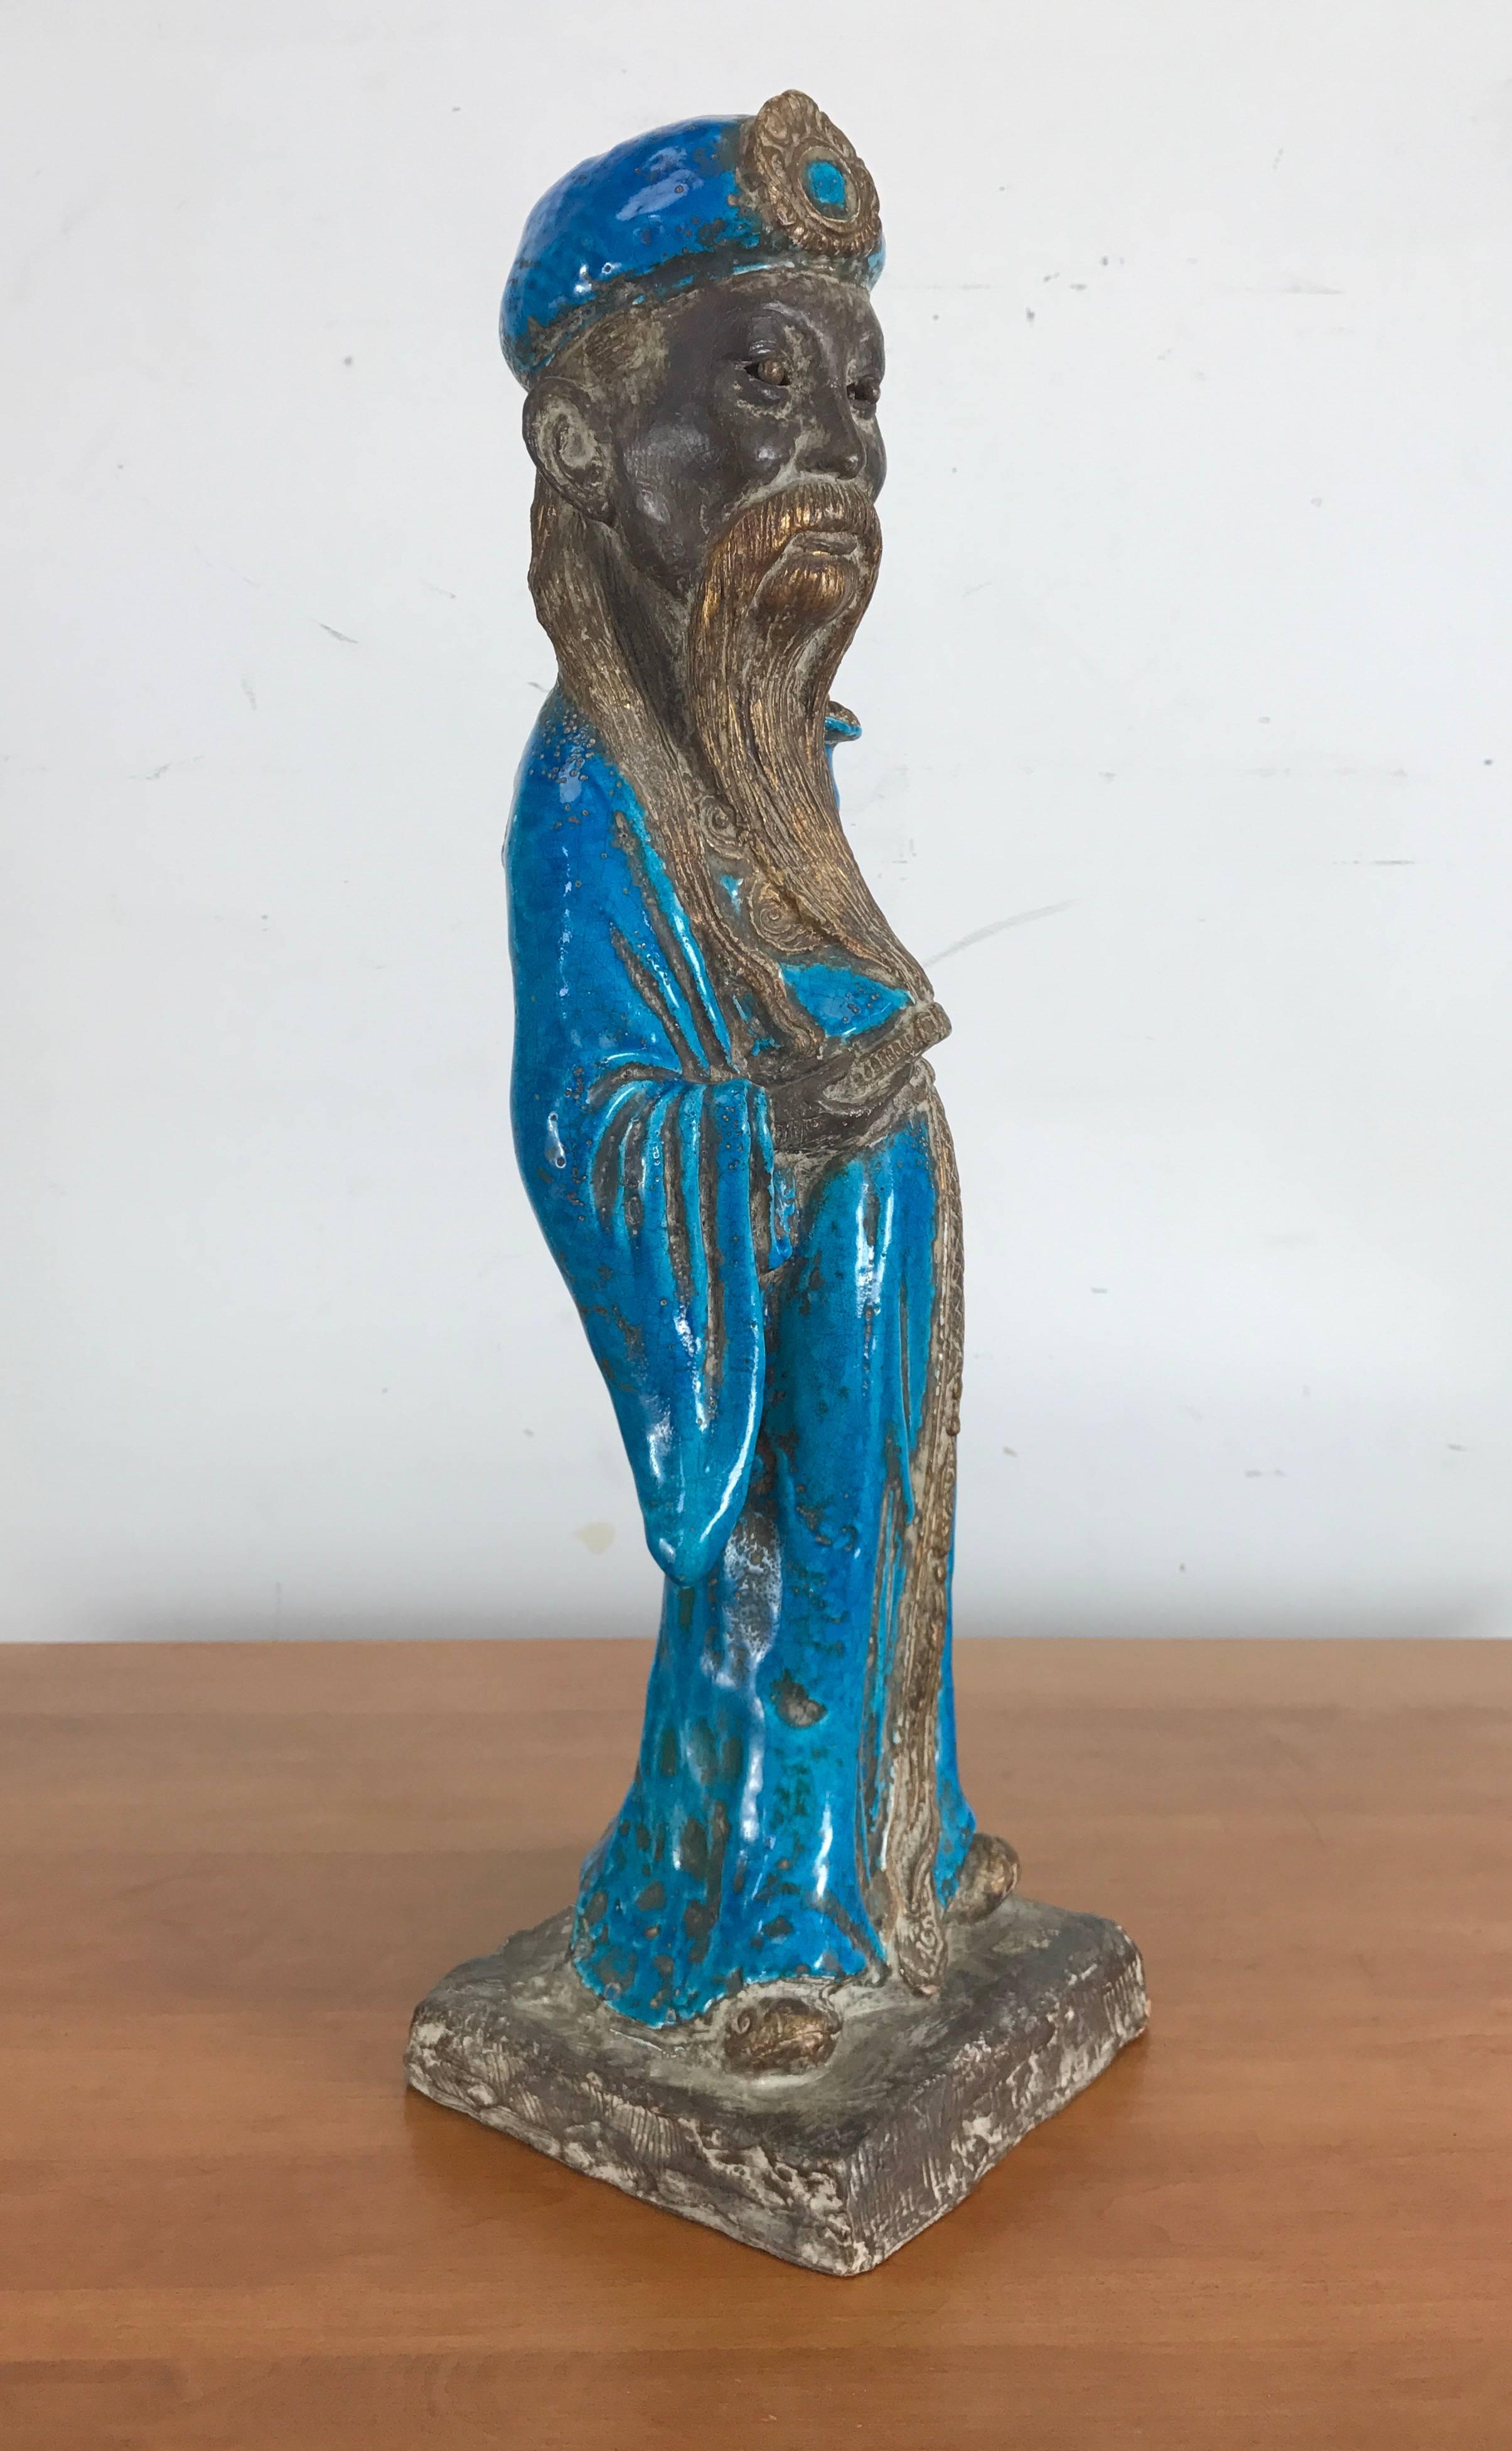 Zaccagnini Mid-Century Modern Italian Art Pottery chinaman statue. Beautiful blues and golds, pierced pottery eyes, extremely well executed. Detailed,.